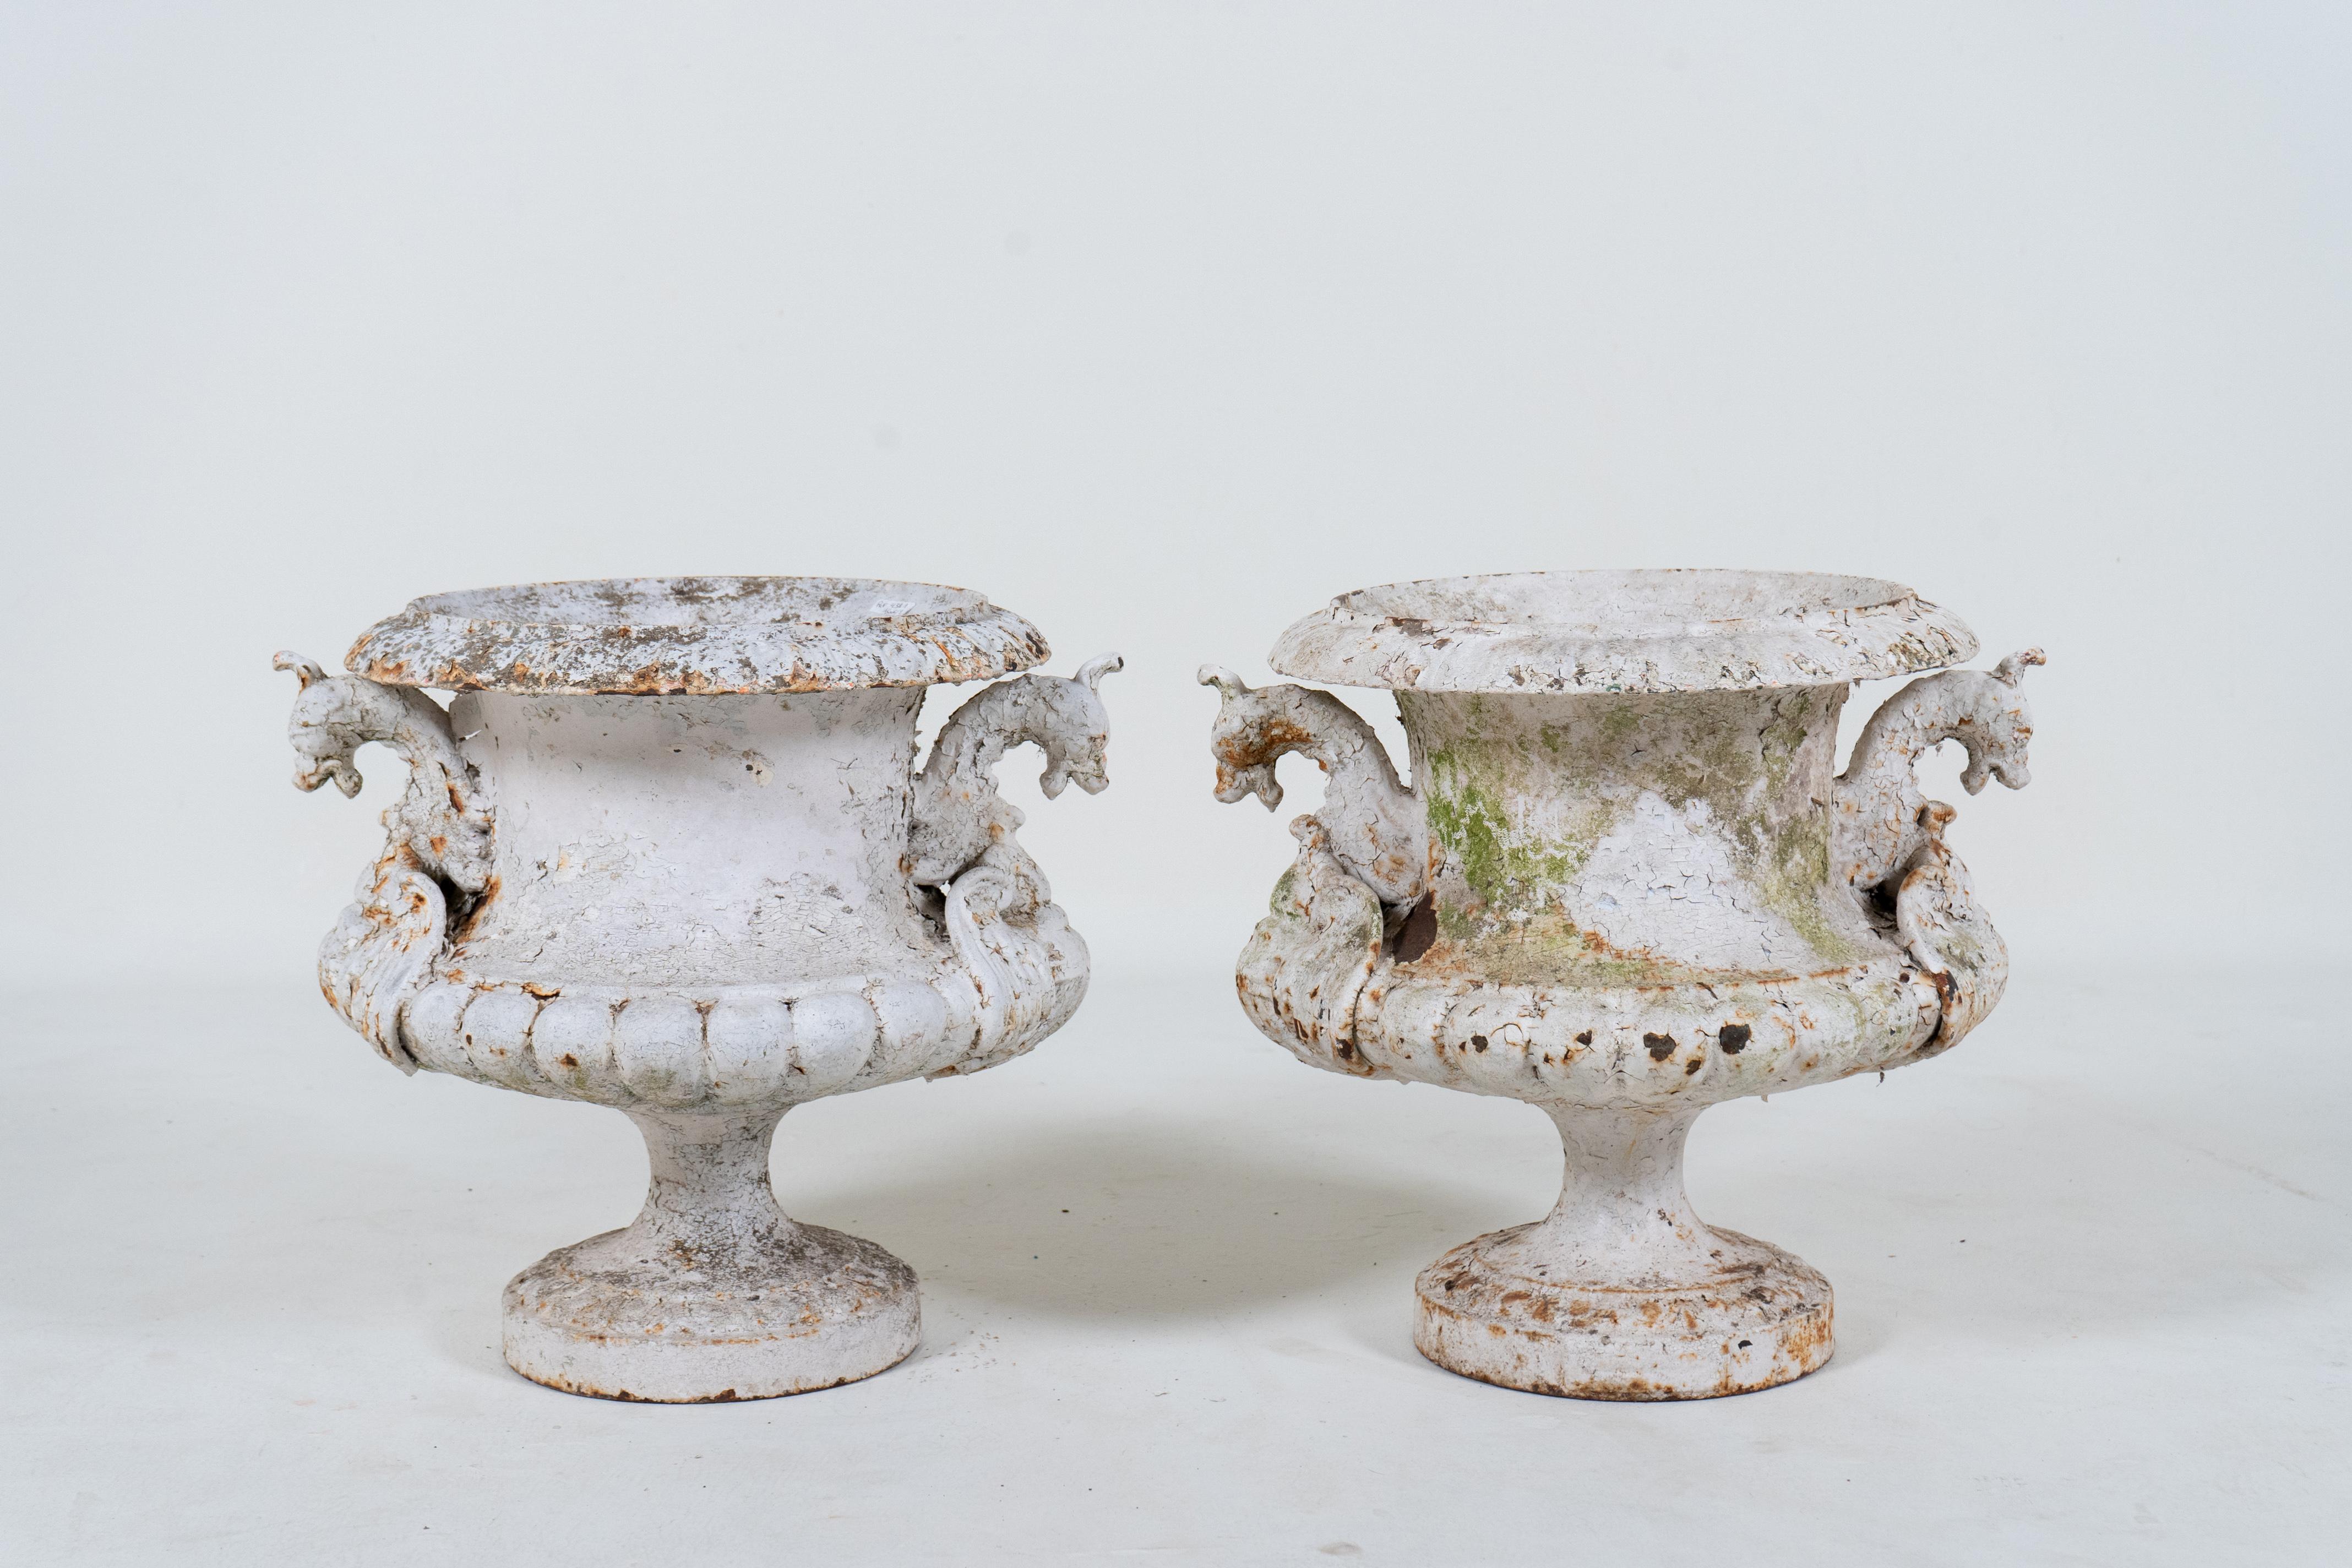 A pair of 19th century French cast iron Garden urns made by Alfred Corneau at his Charleville foundry. The iron garden urns are adorned with well-detailed griffin handles, lobed bowls and a stepped base. They are quite heavy and covered in layers of